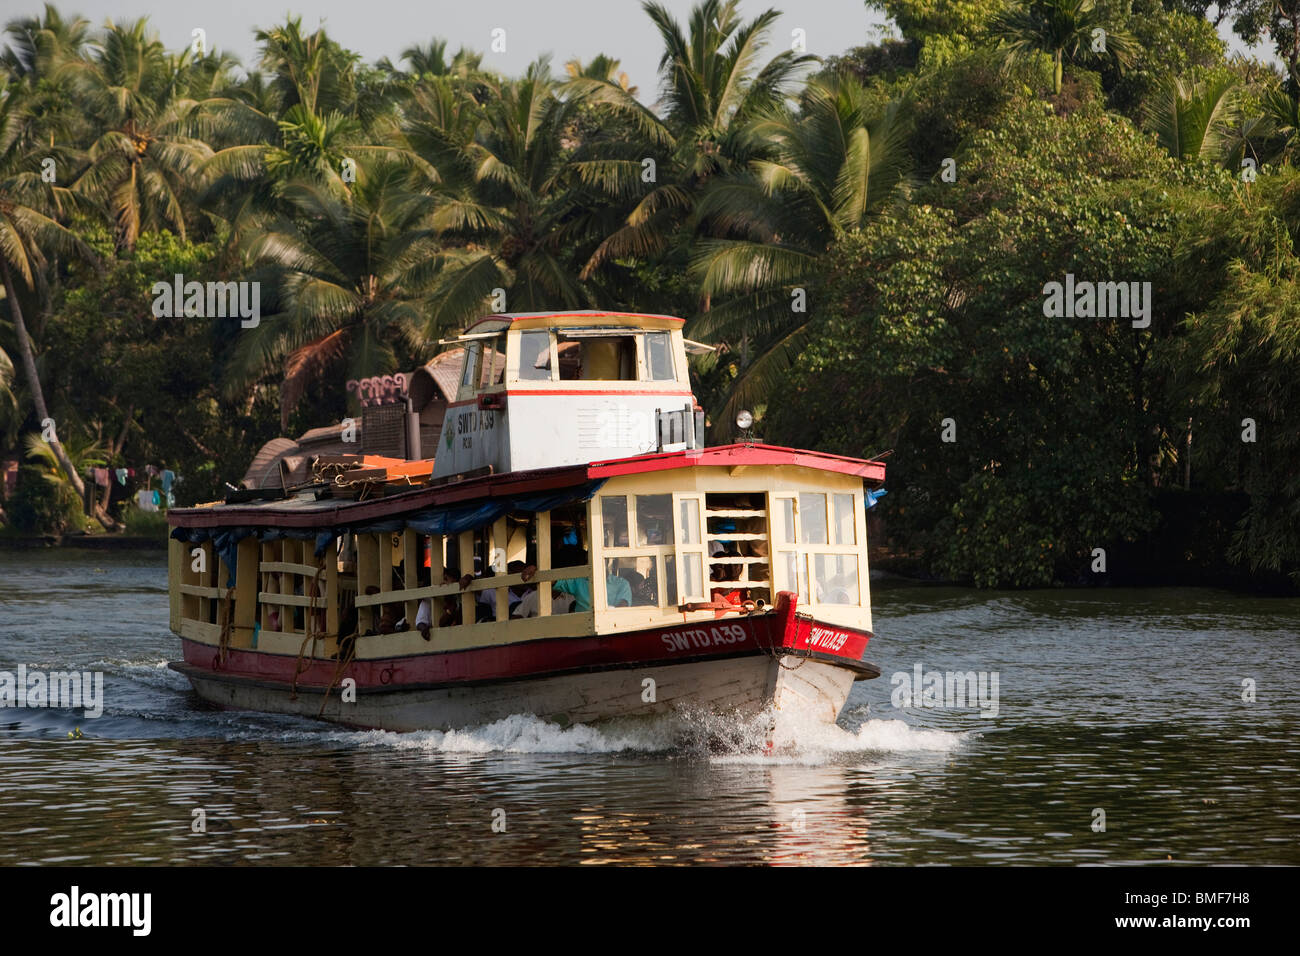 India, Kerala, Alleppey, Alappuzha, backwaters, local inter-island ferry Stock Photo